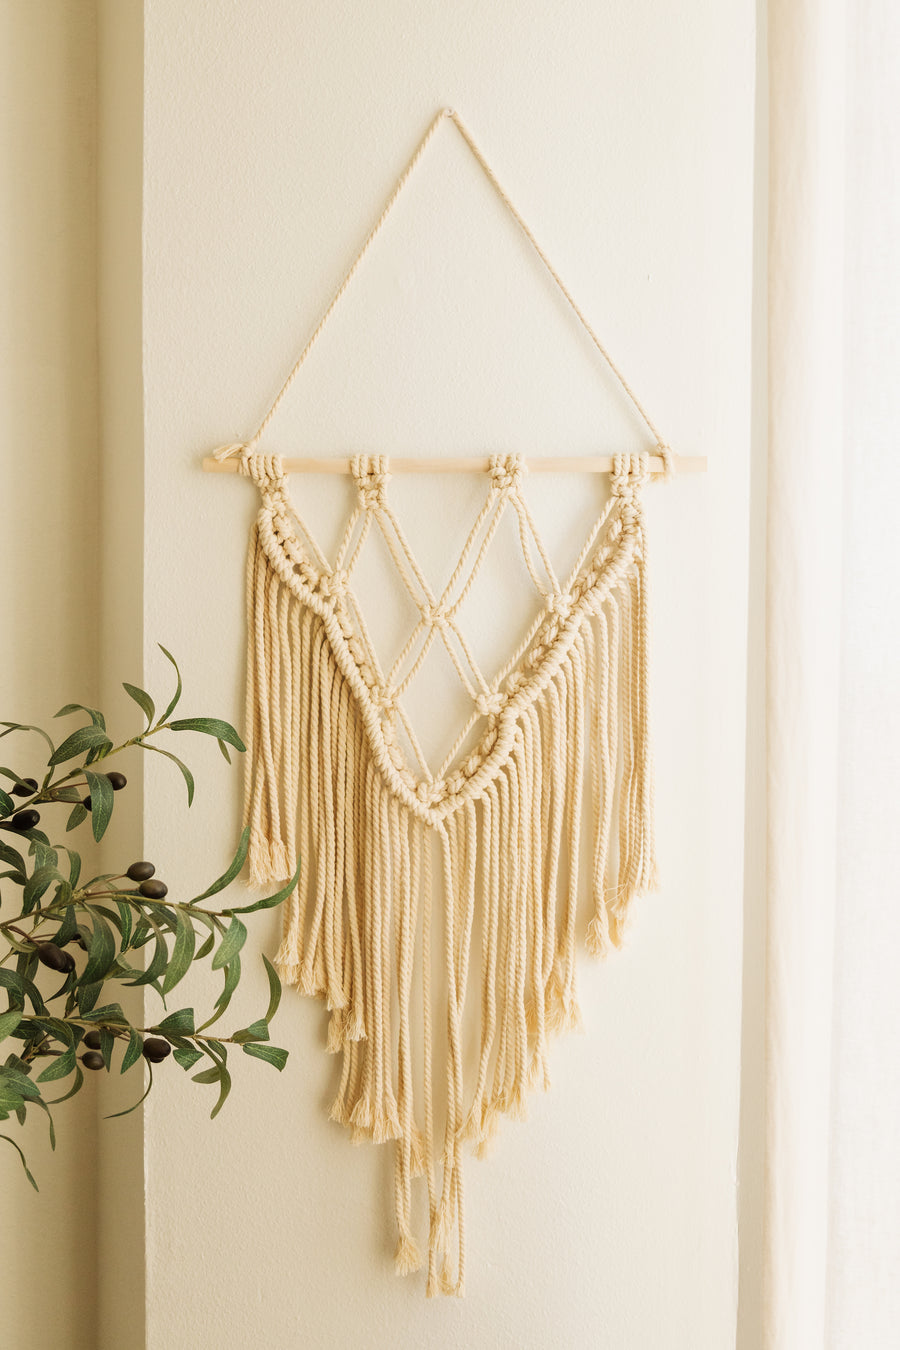 A cream colored cord is used by our artisan partners. Dimensions: About 38in hanging and 16in wide